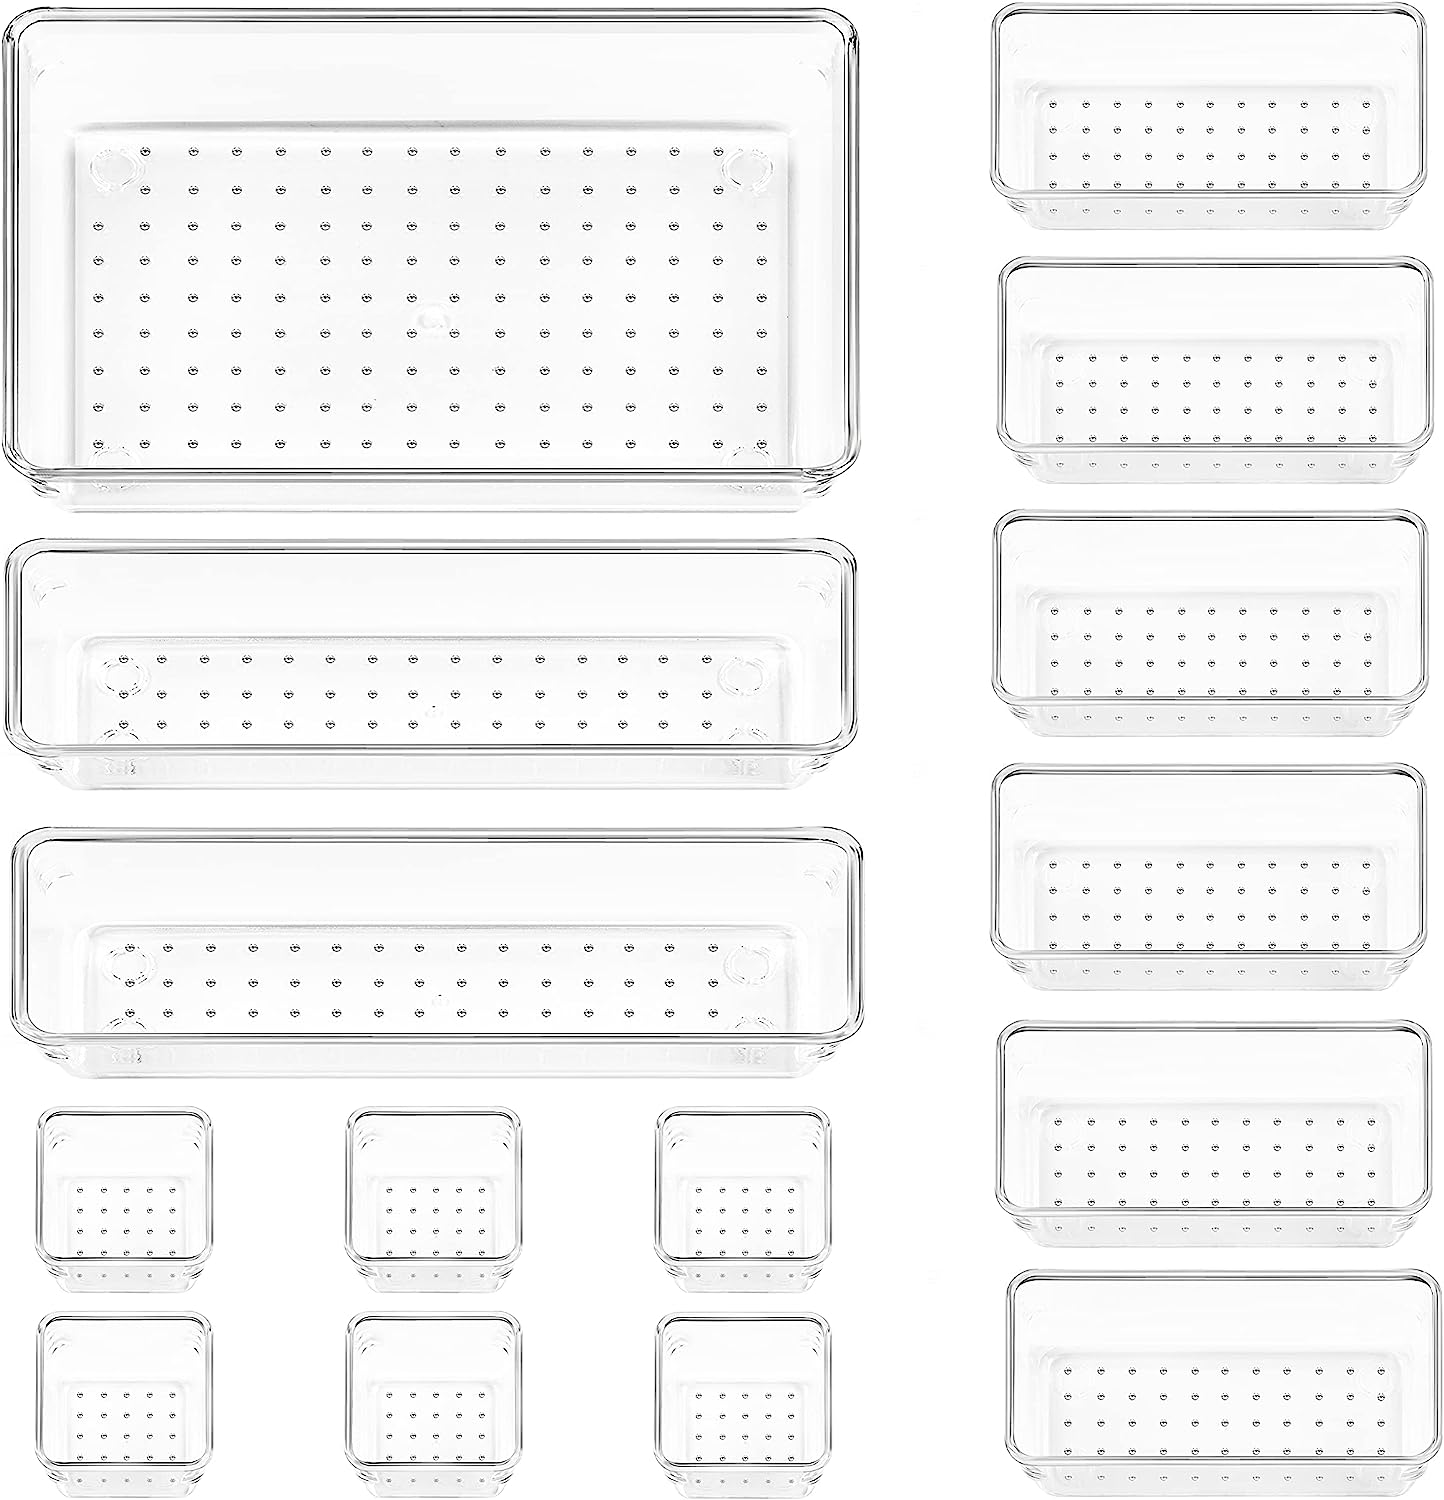 25 PCS Clear Plastic Drawer Organizers Set, 4-Size Versatile Bathroom and Vanity Drawer Organizer Trays, Storage Bins for Makeup, Bedroom, Kitchen Gadgets Utensils and Office